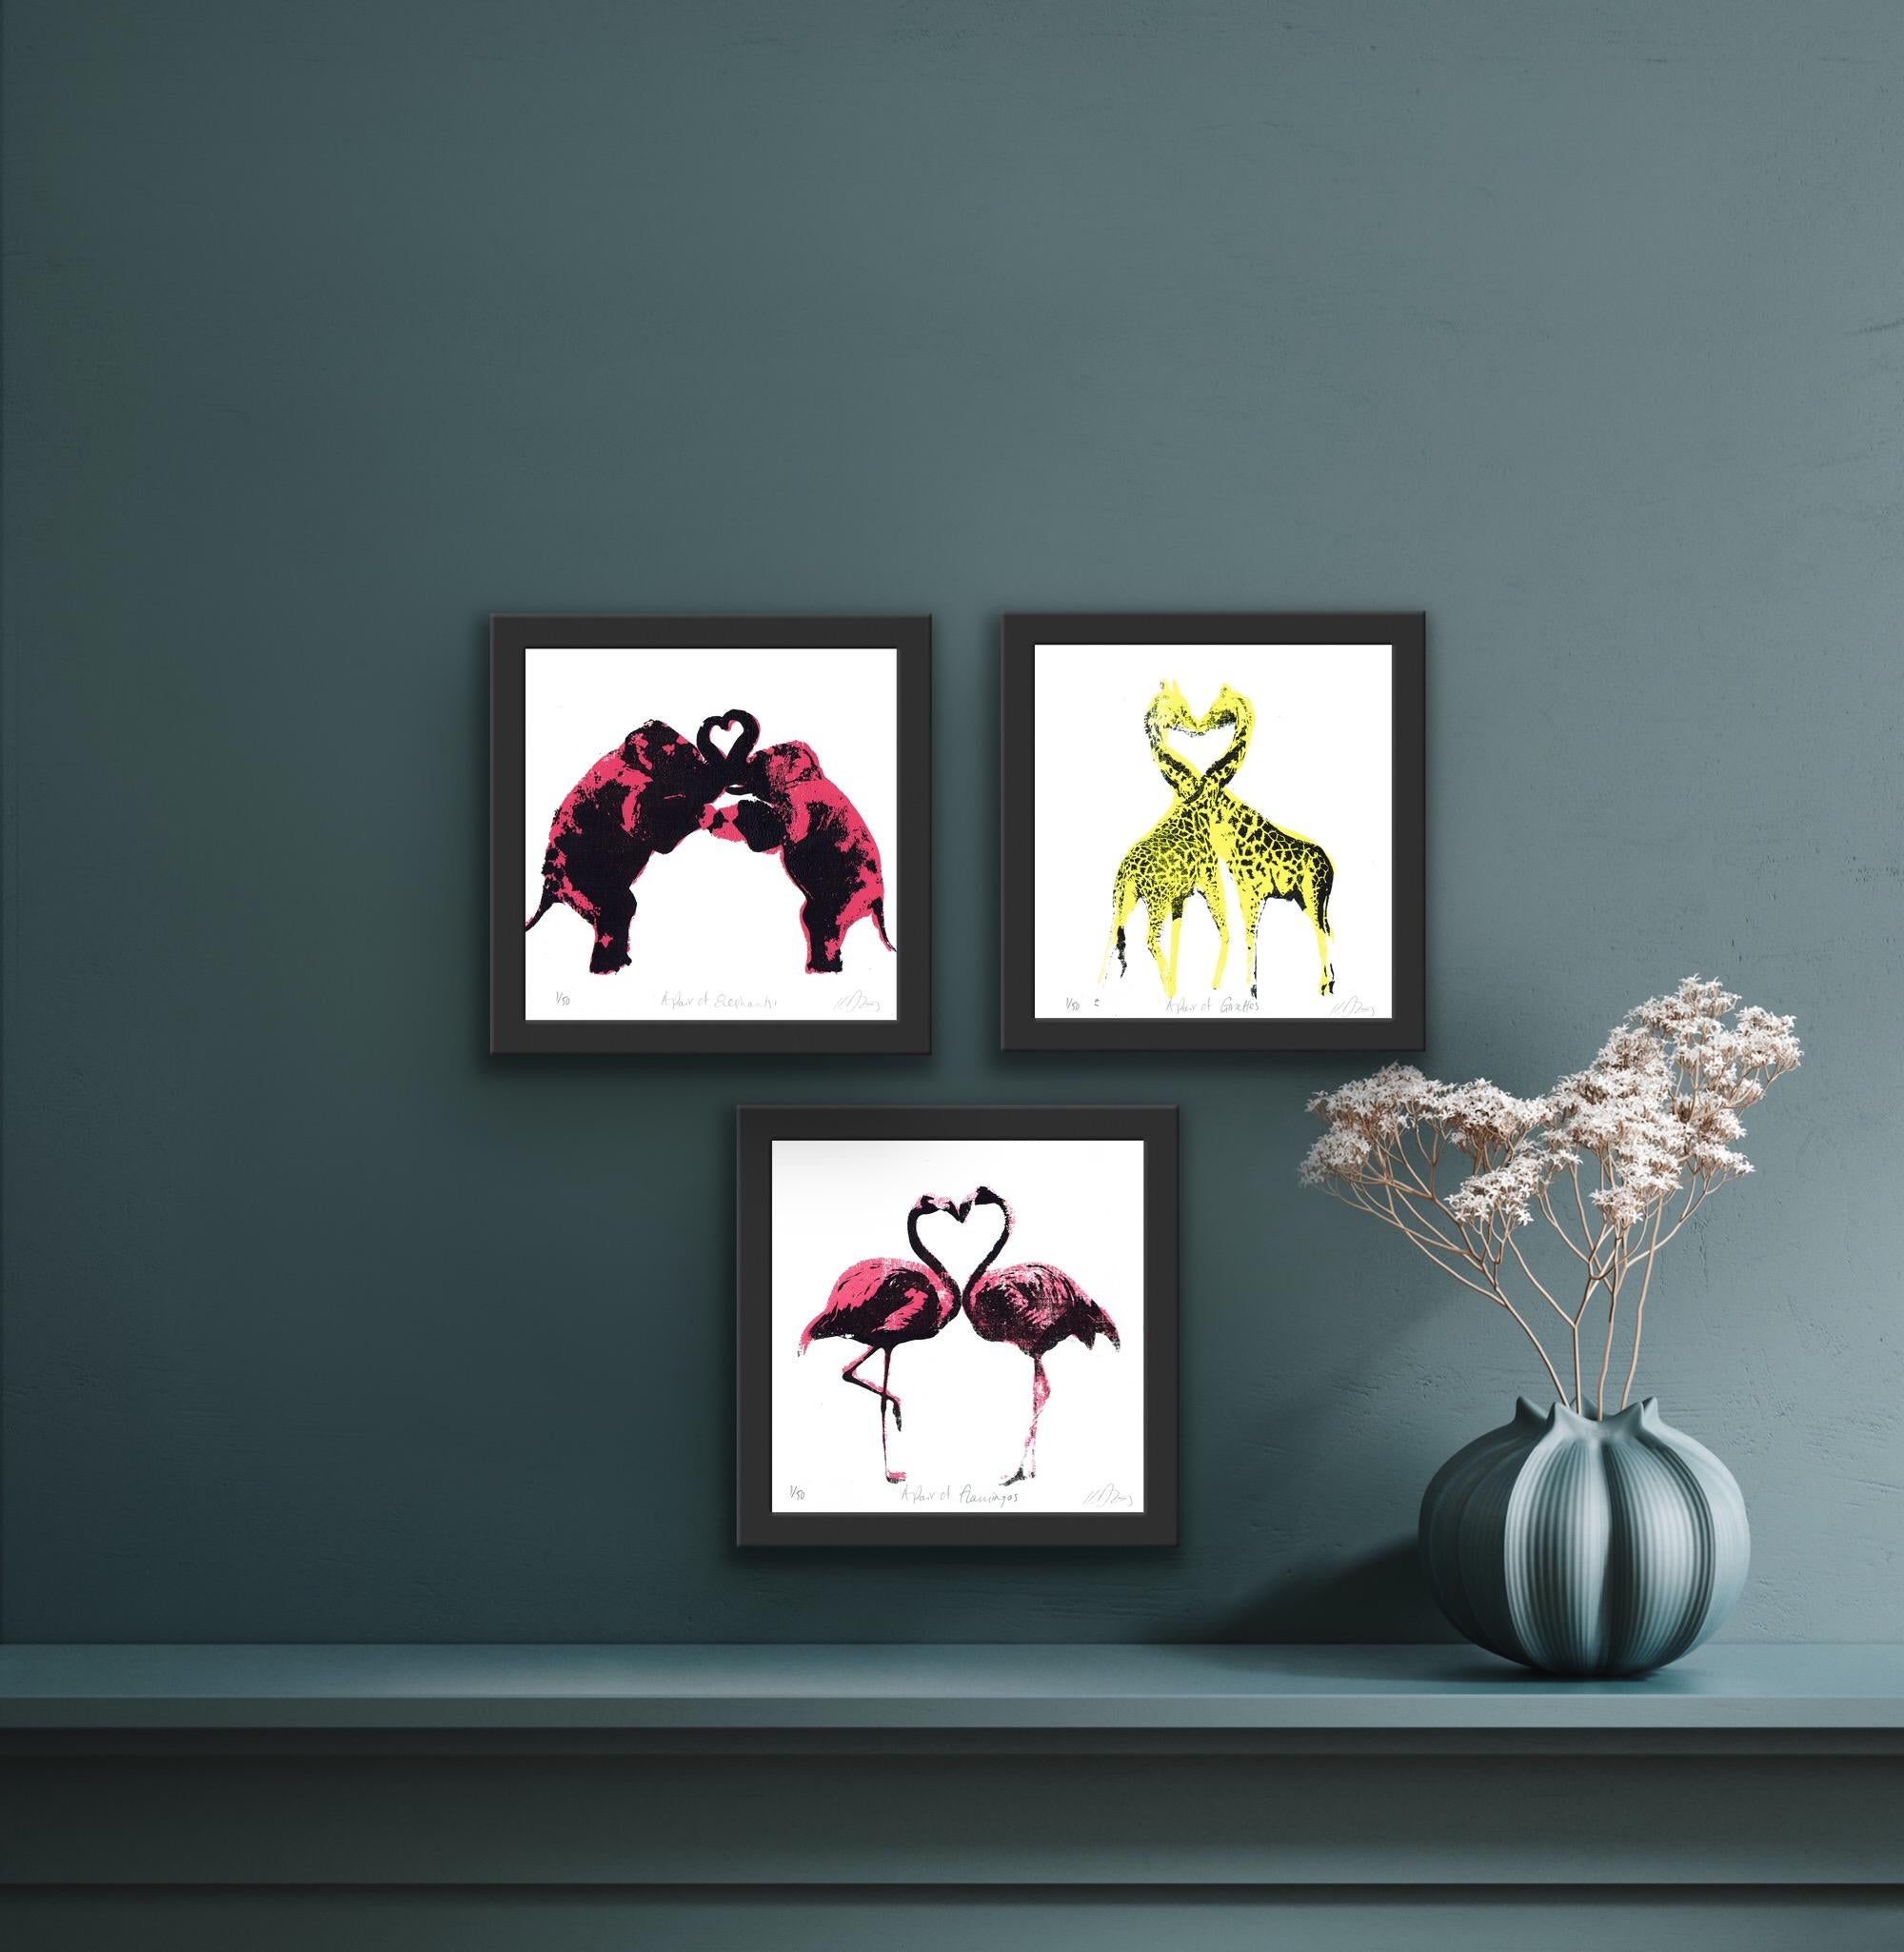 A Pair of Flamingos, A Pair of Giraffes and A Pair of Elephants Triptych - Print by Katie Edwards